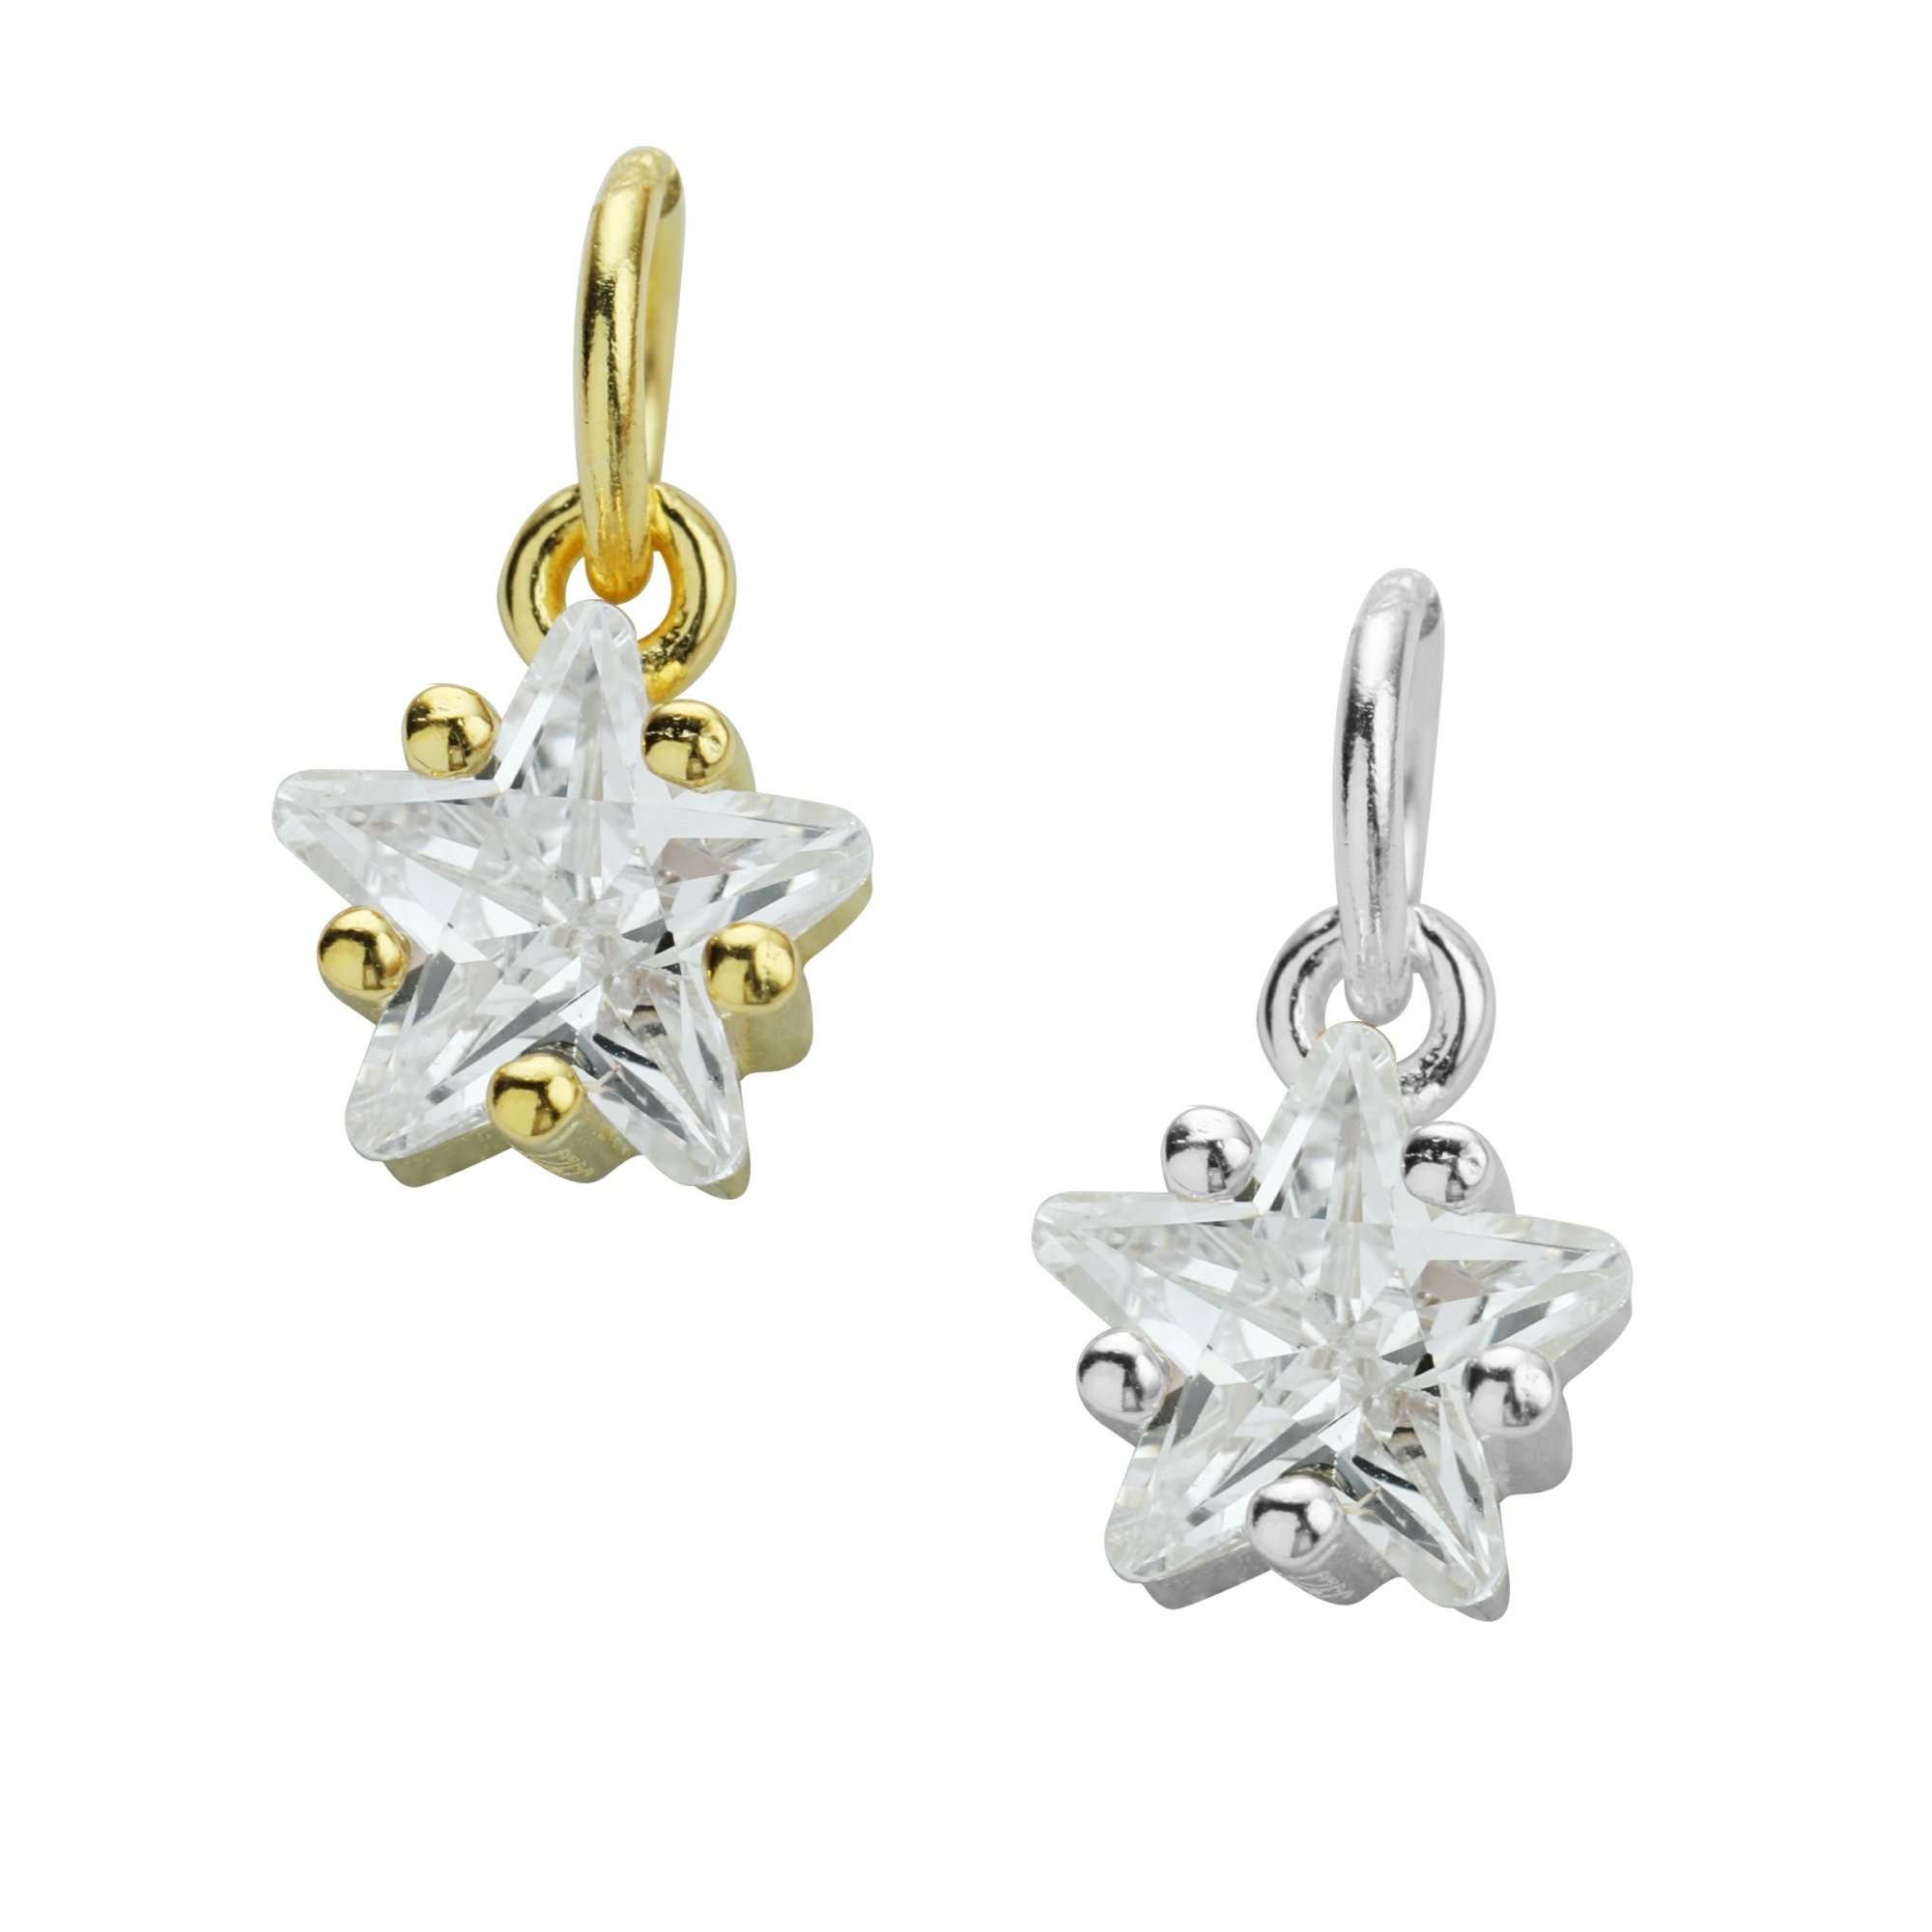 6MM CZ Stone Star Charm,Solid 925 Sterling Silver Gold Plated Pendant Charm,DIY Pendant Charm Supplies 1431192 - Click Image to Close